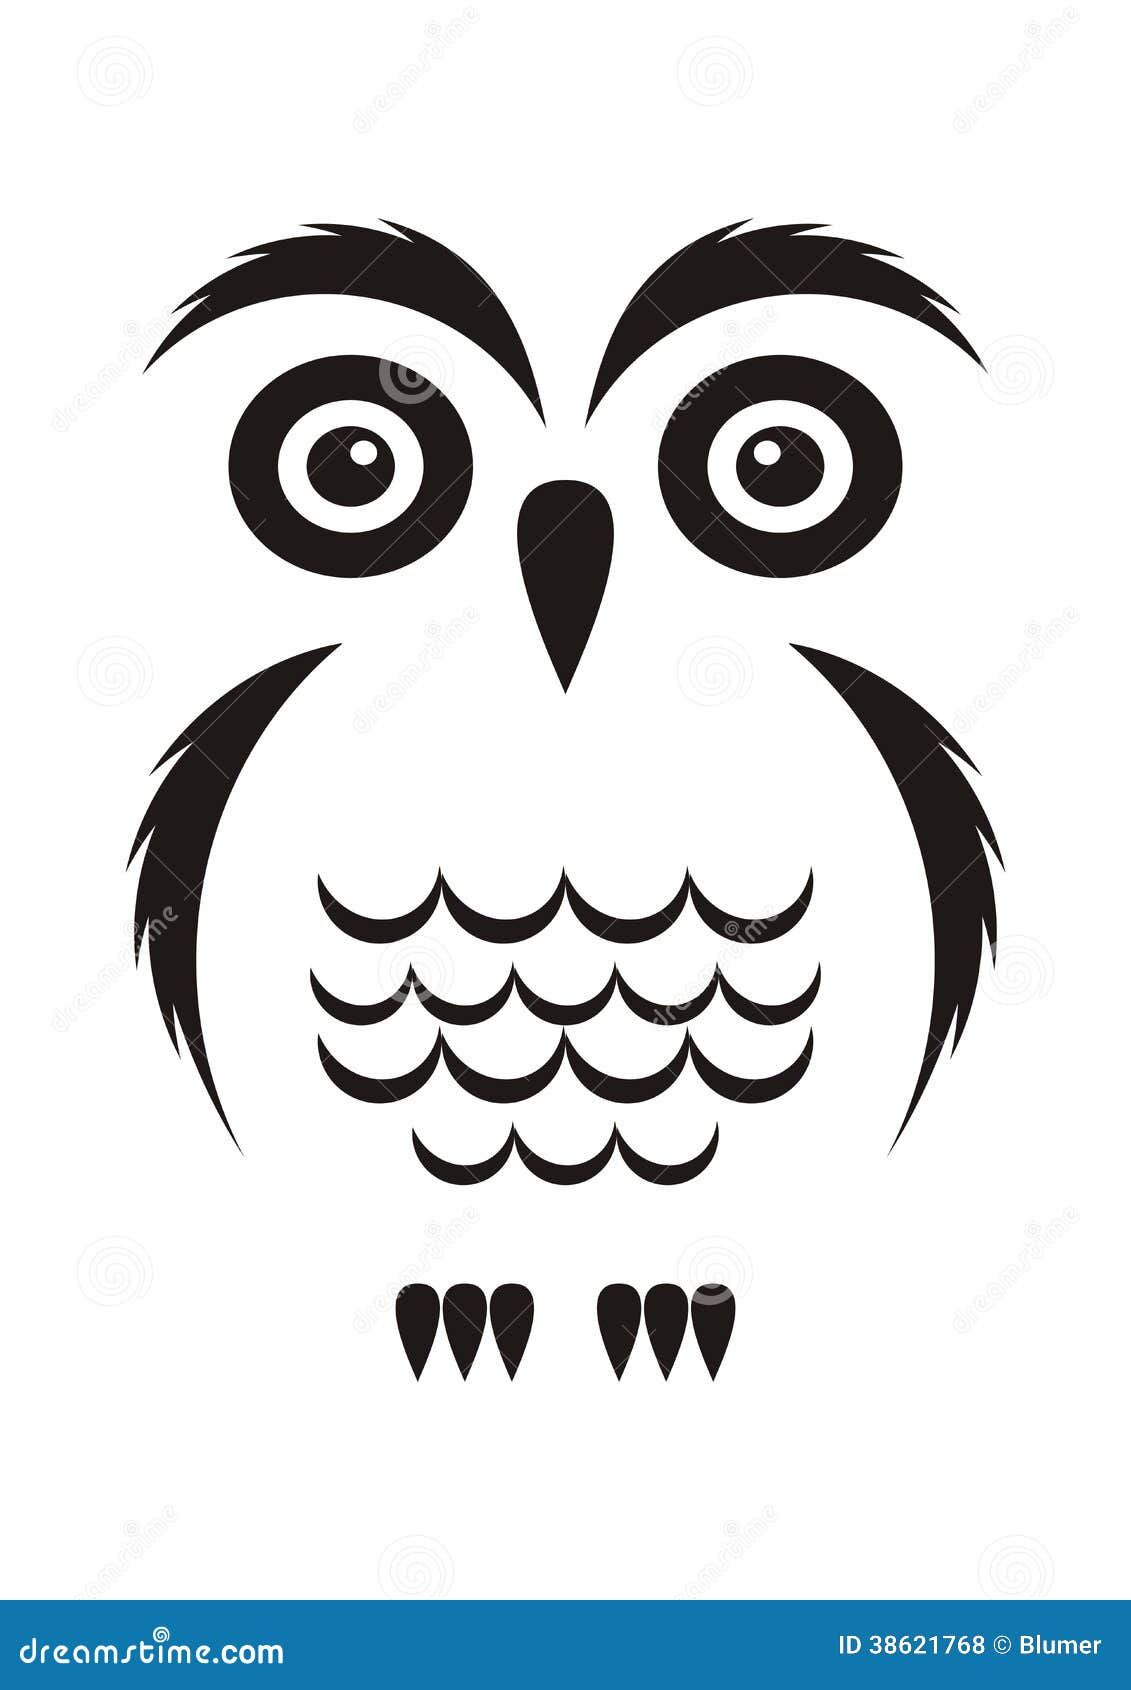 owl images clipart black and white - photo #38